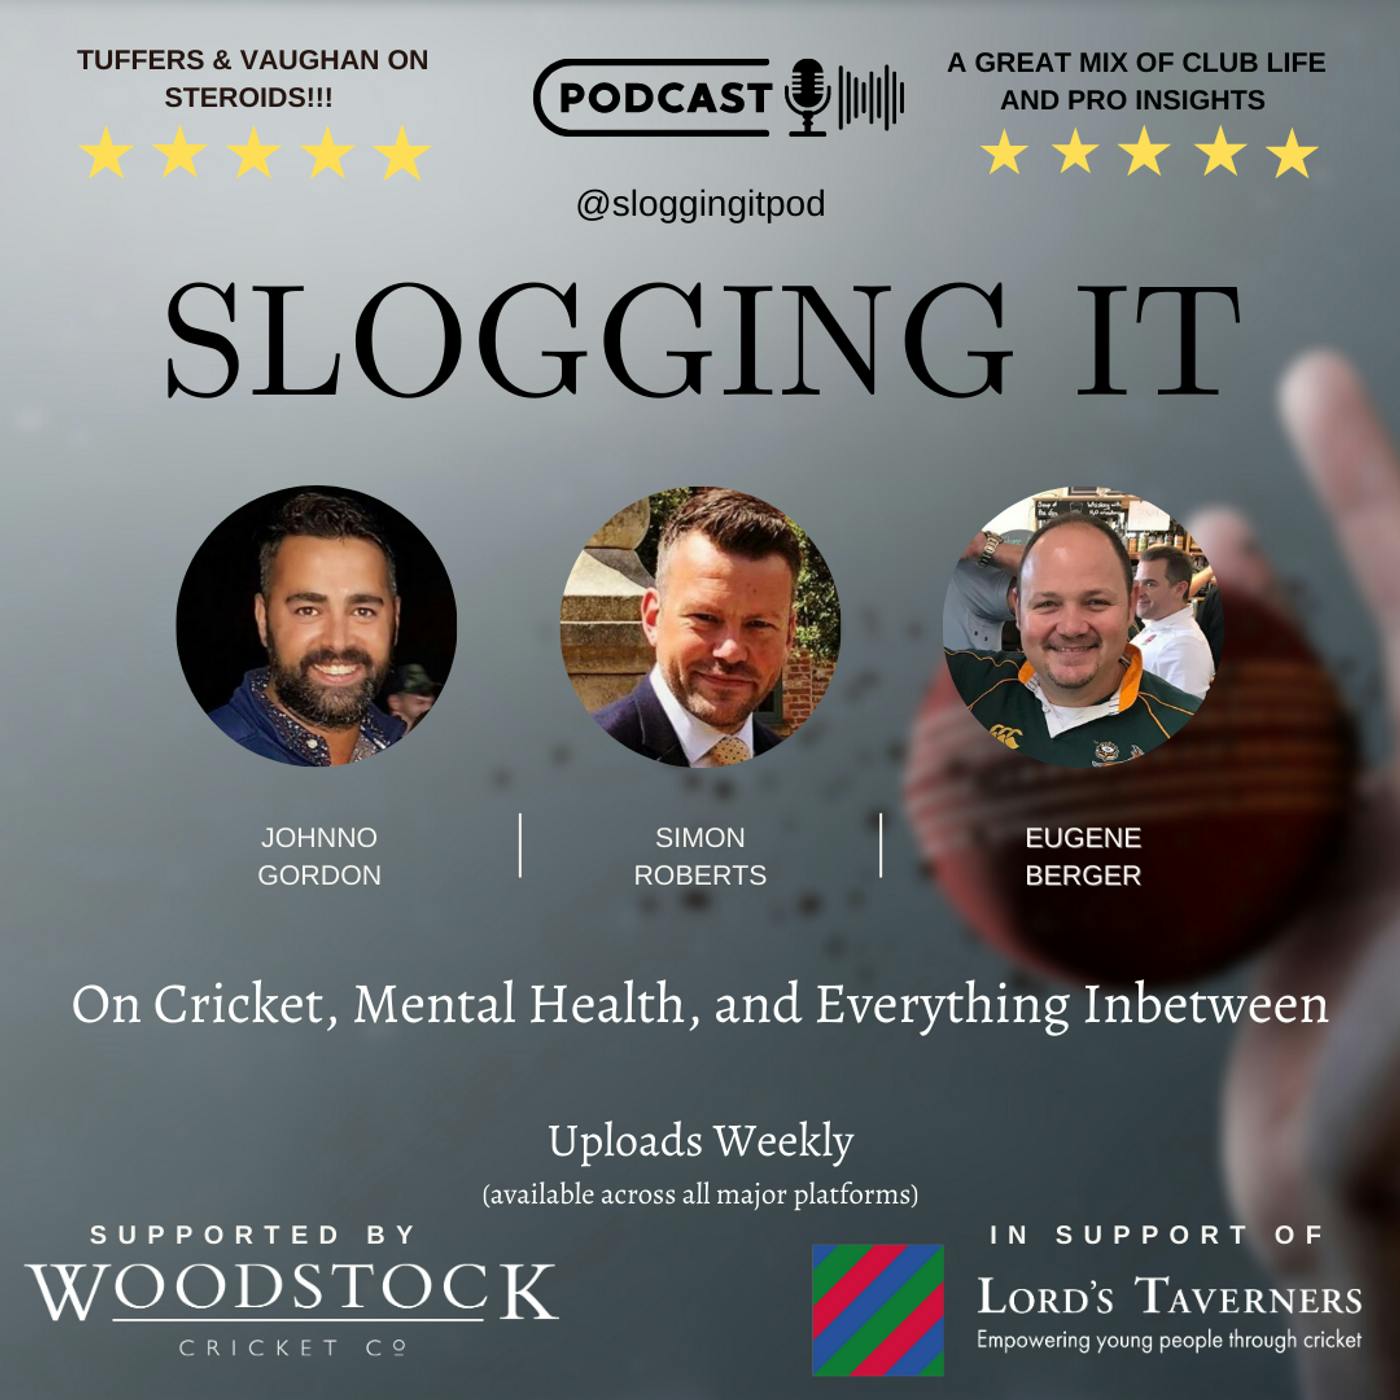 In this week’s episode of Slogging It, we discussed the recent T20 series between England and New Zealand, as well as the one-day series between South Africa and Australia.